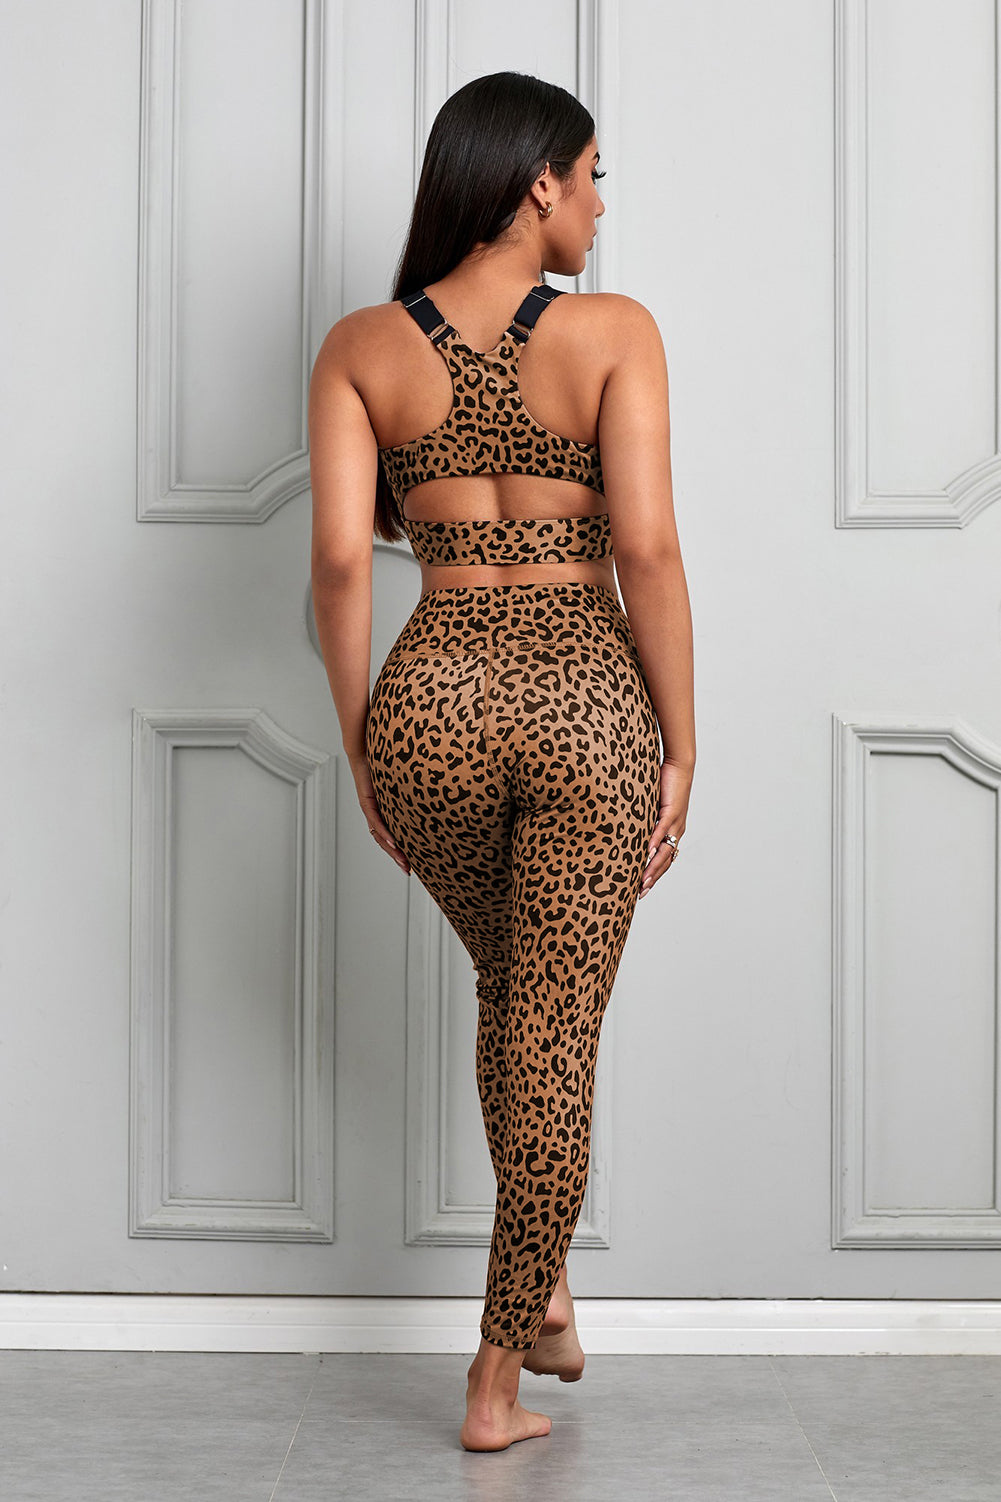 Back View, Leopard Printed Sports Bra and Leggings Set